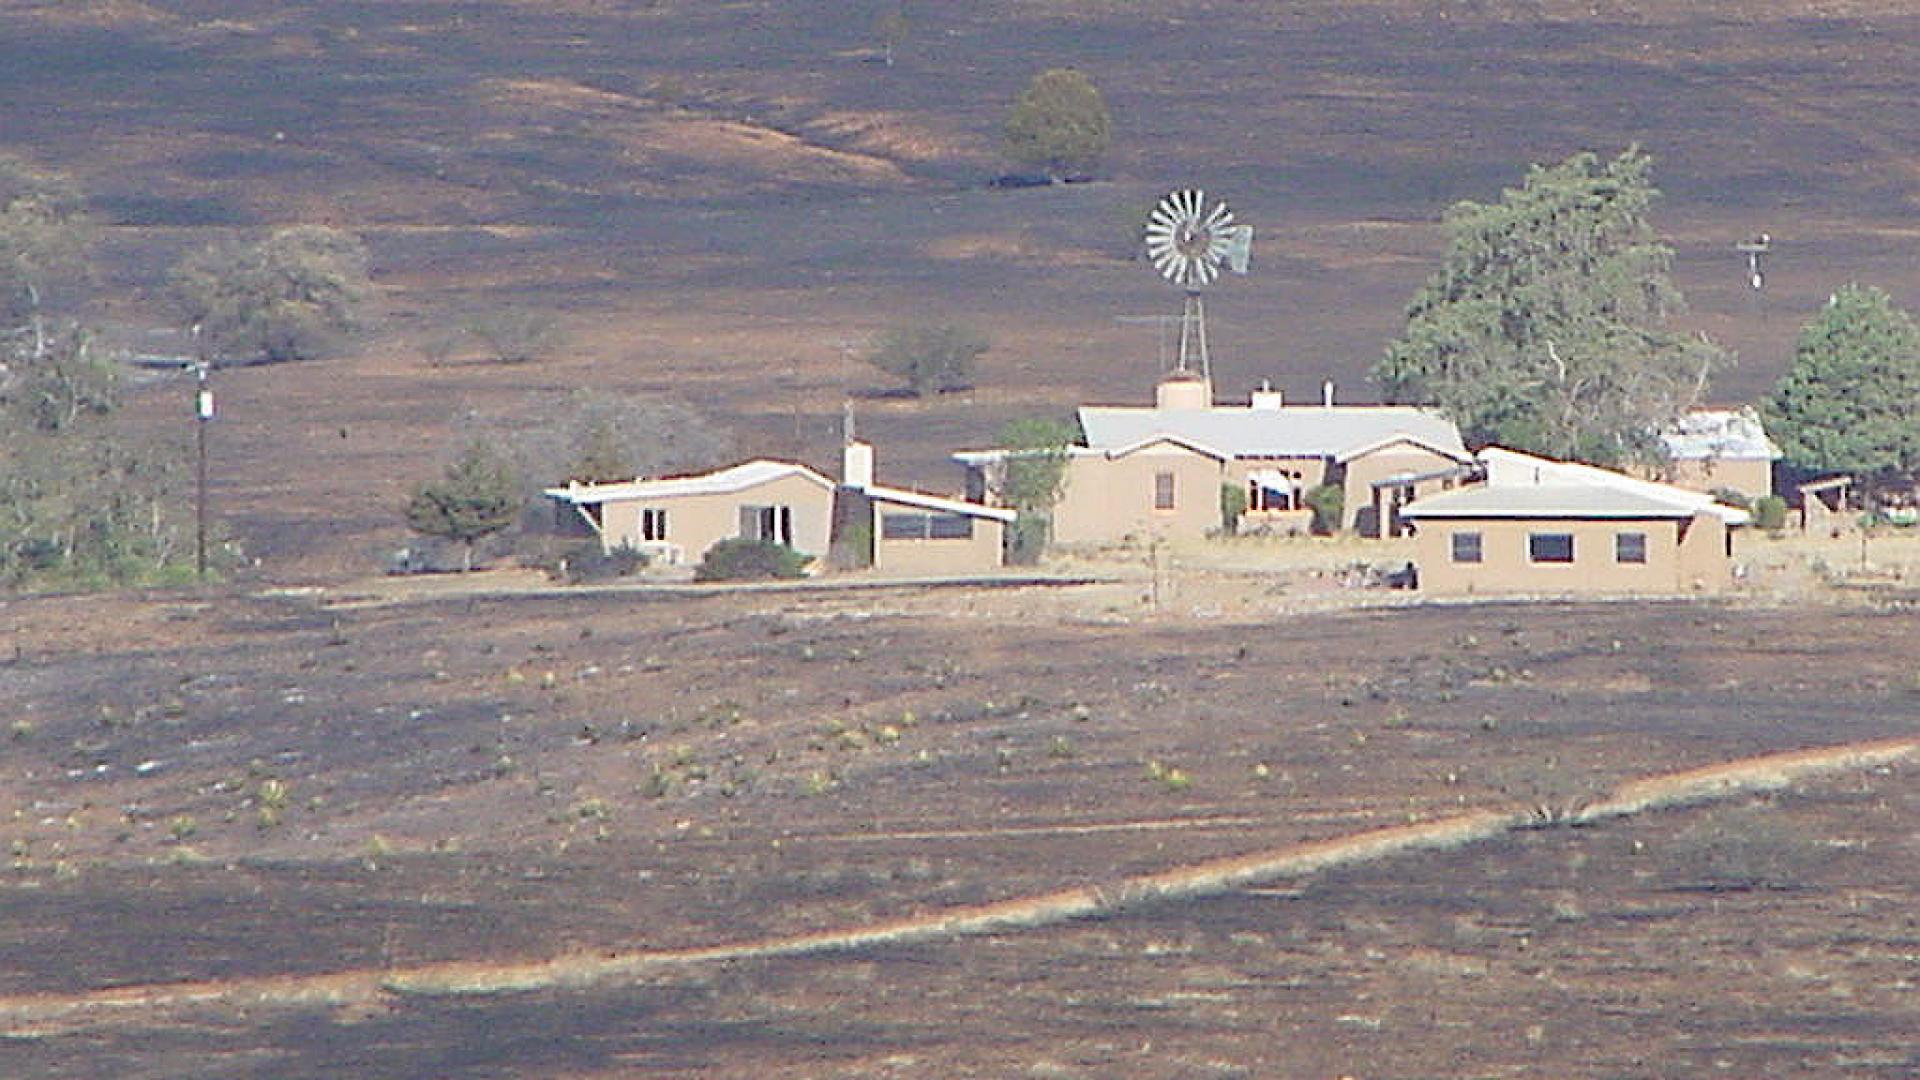 Ranch completely surrounded by burned land